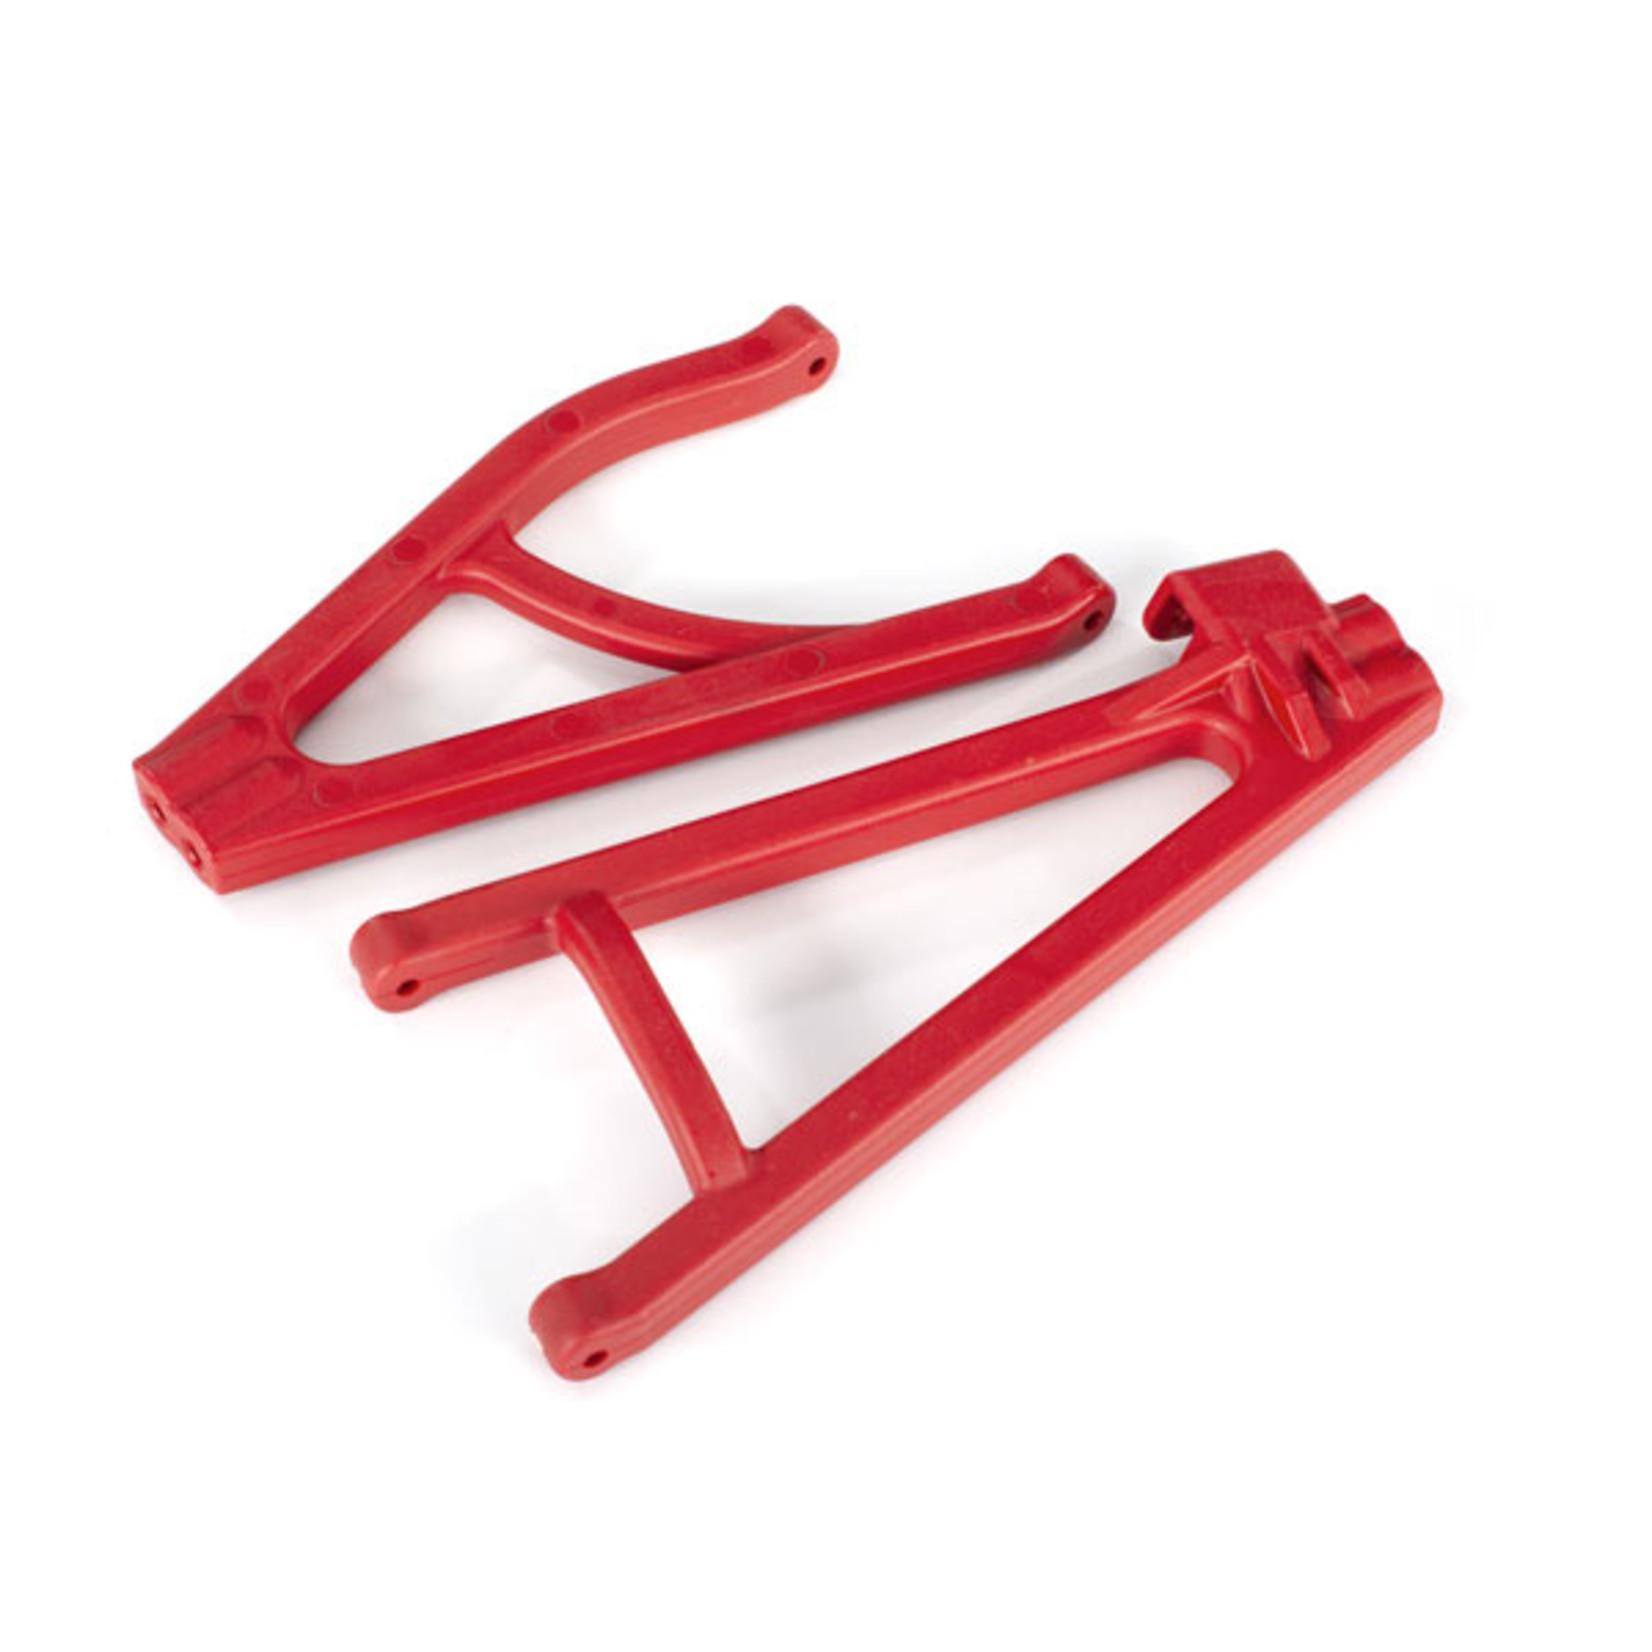 Traxxas 8633R - Suspension arms, red, rear (right), heavy